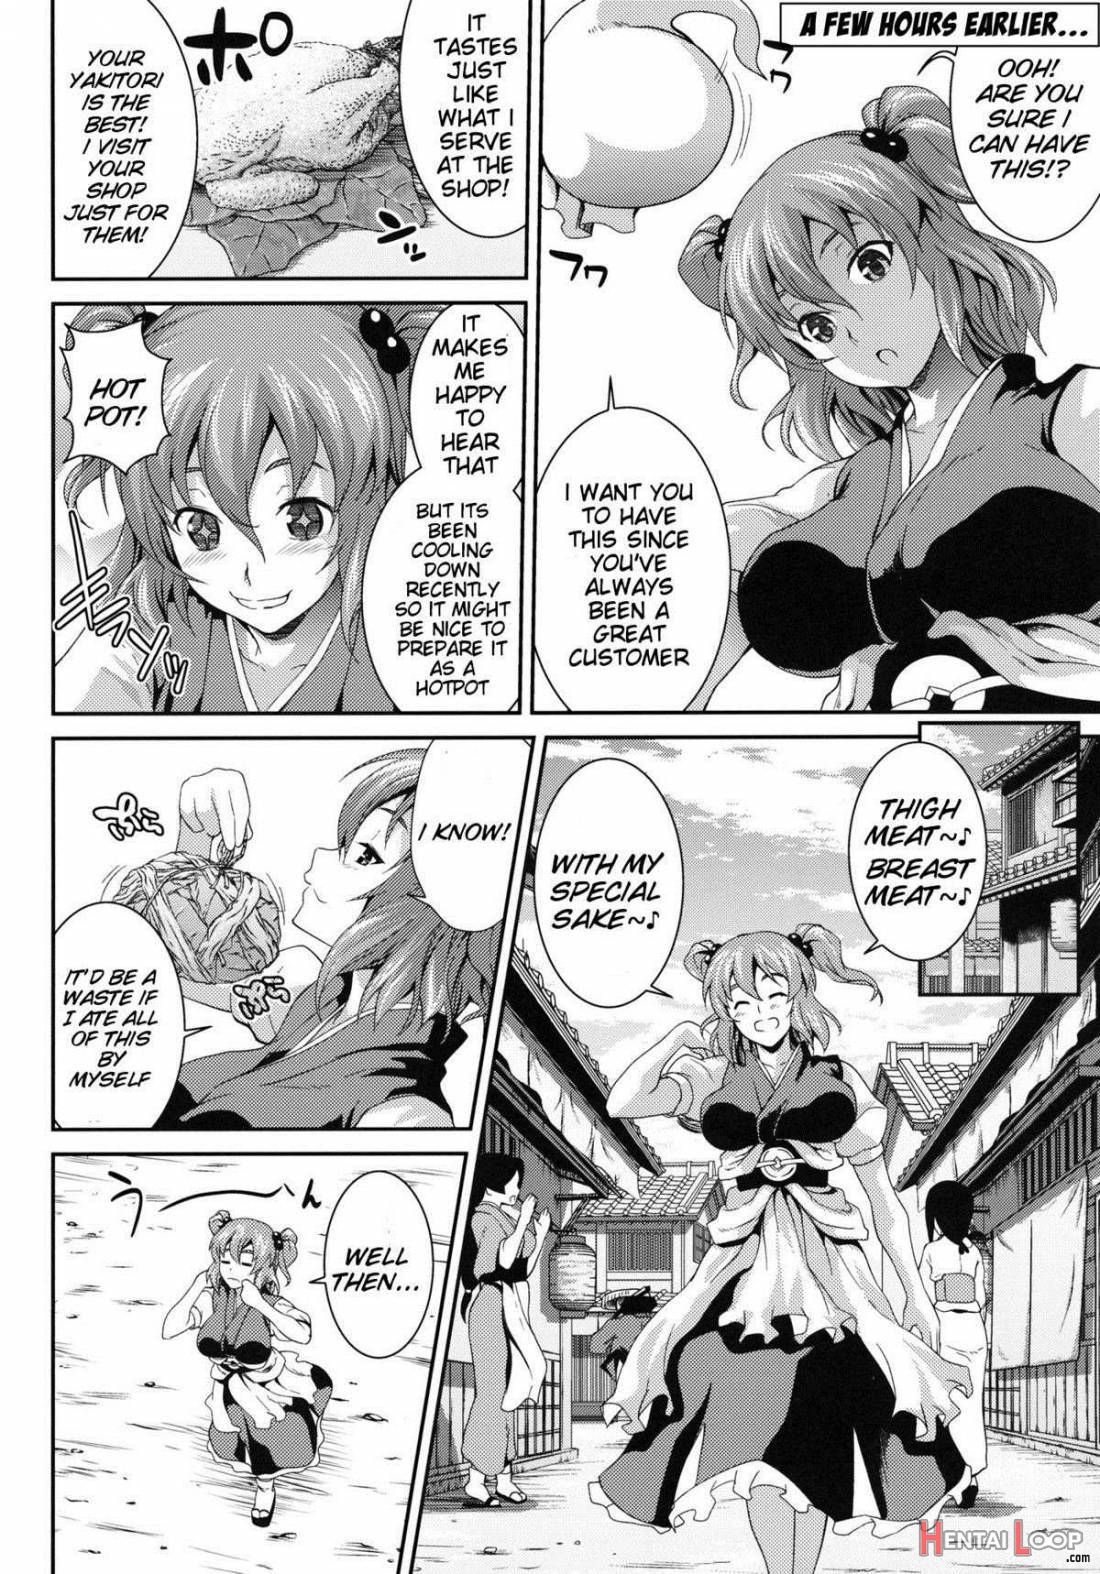 Together With Komachi 3 page 3